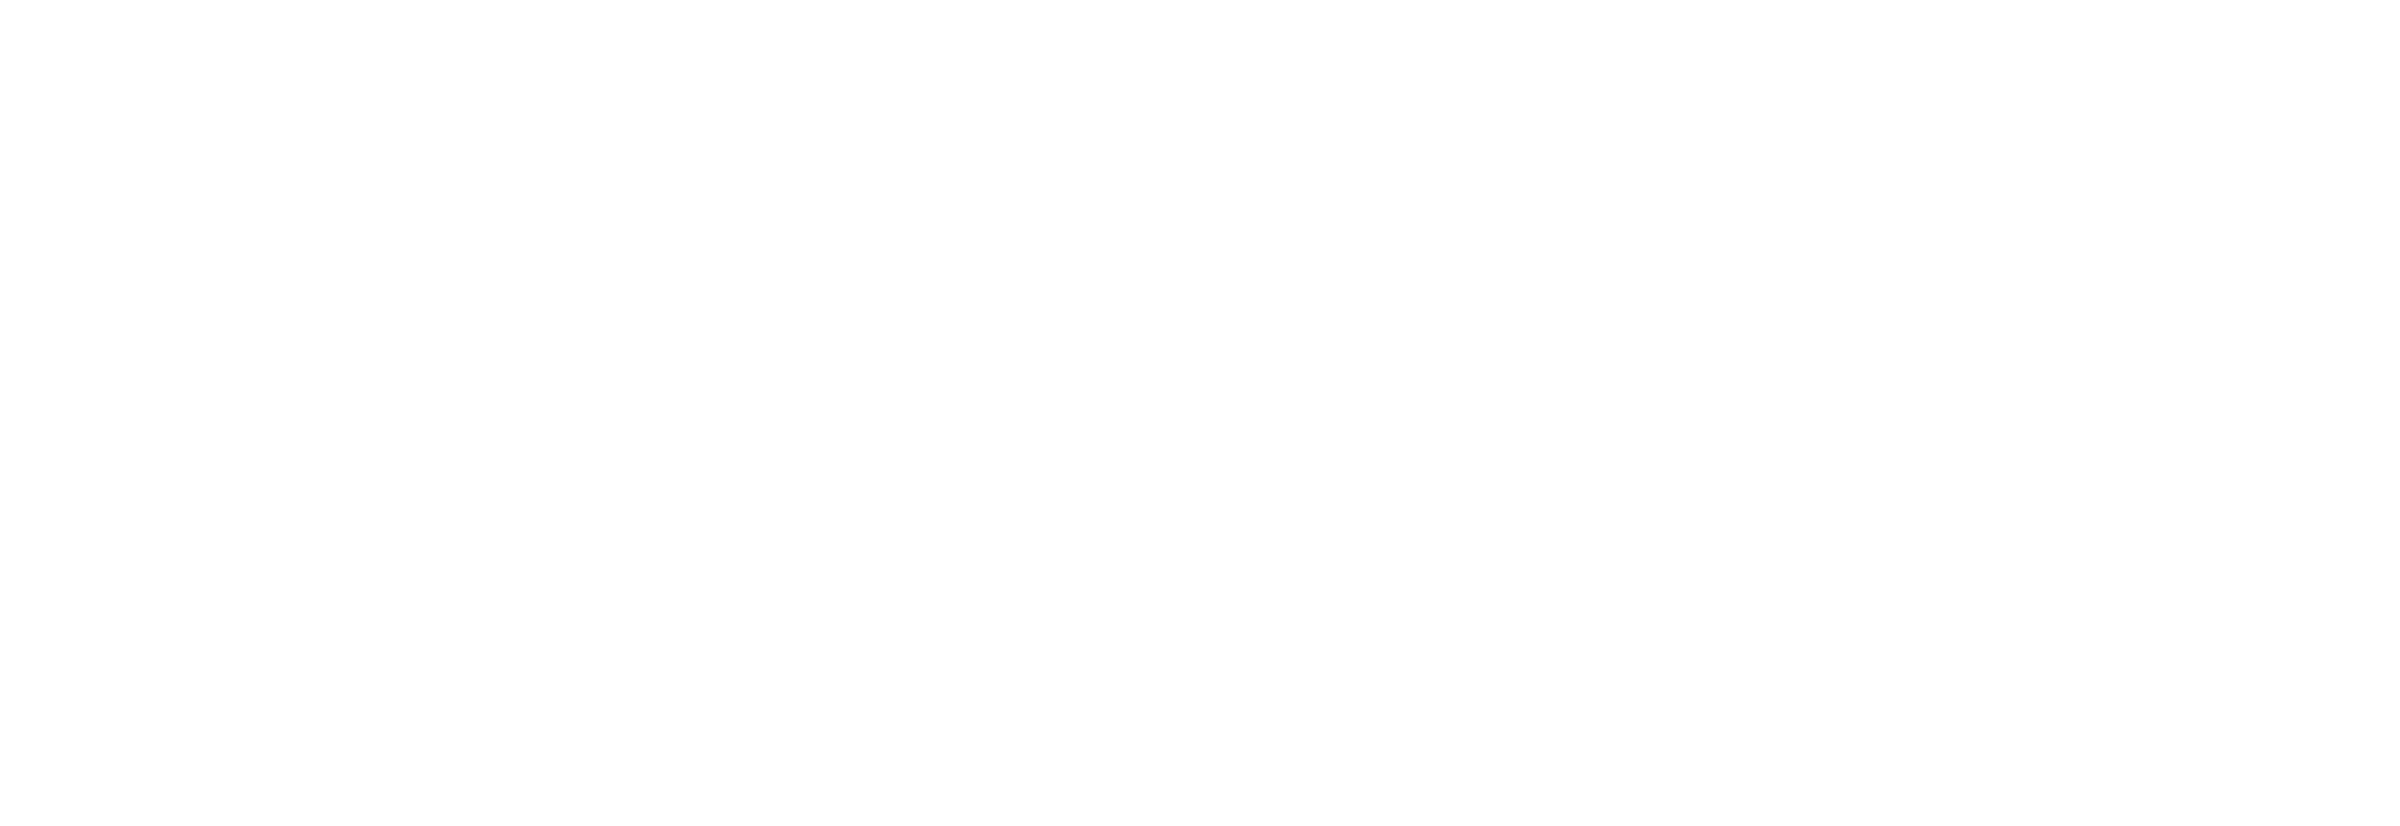 Broad + Noble Logo with Toll Brothers Apartment Living